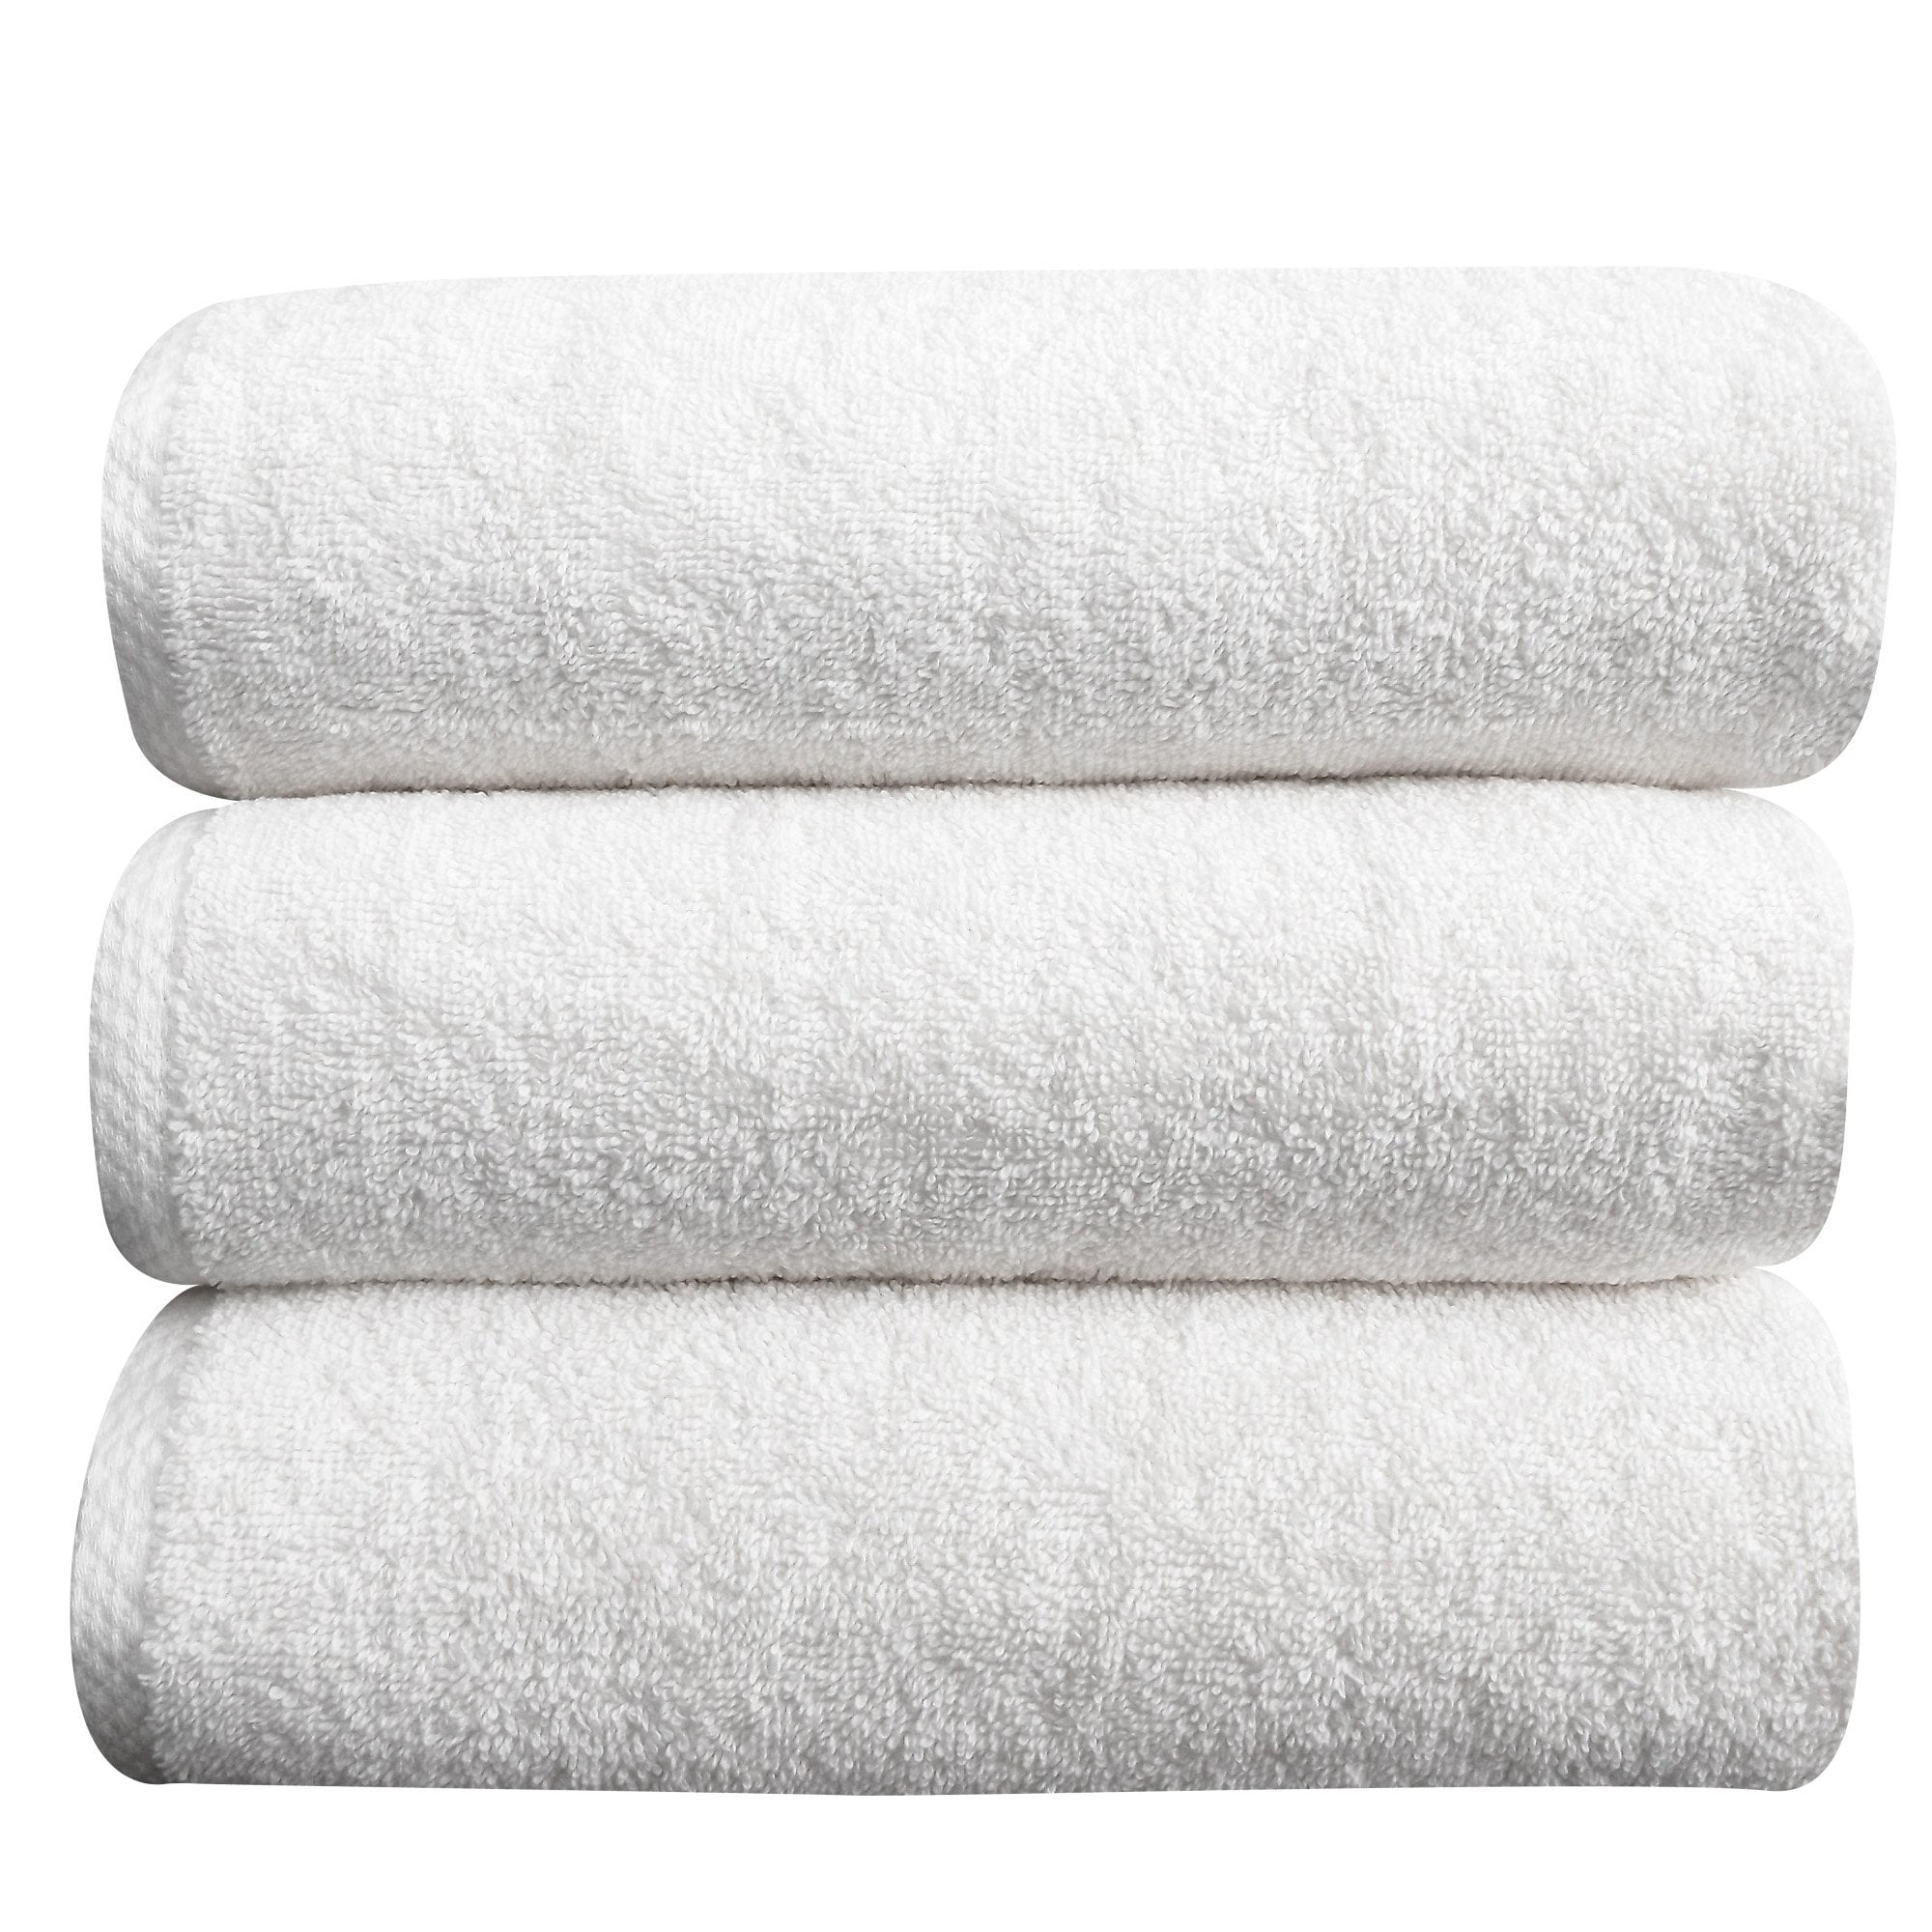 Ruthie's Textile 7-Pack: 27 X 52 100% Cotton Extra-Absorbent Bath Towels  - Assorted Colors